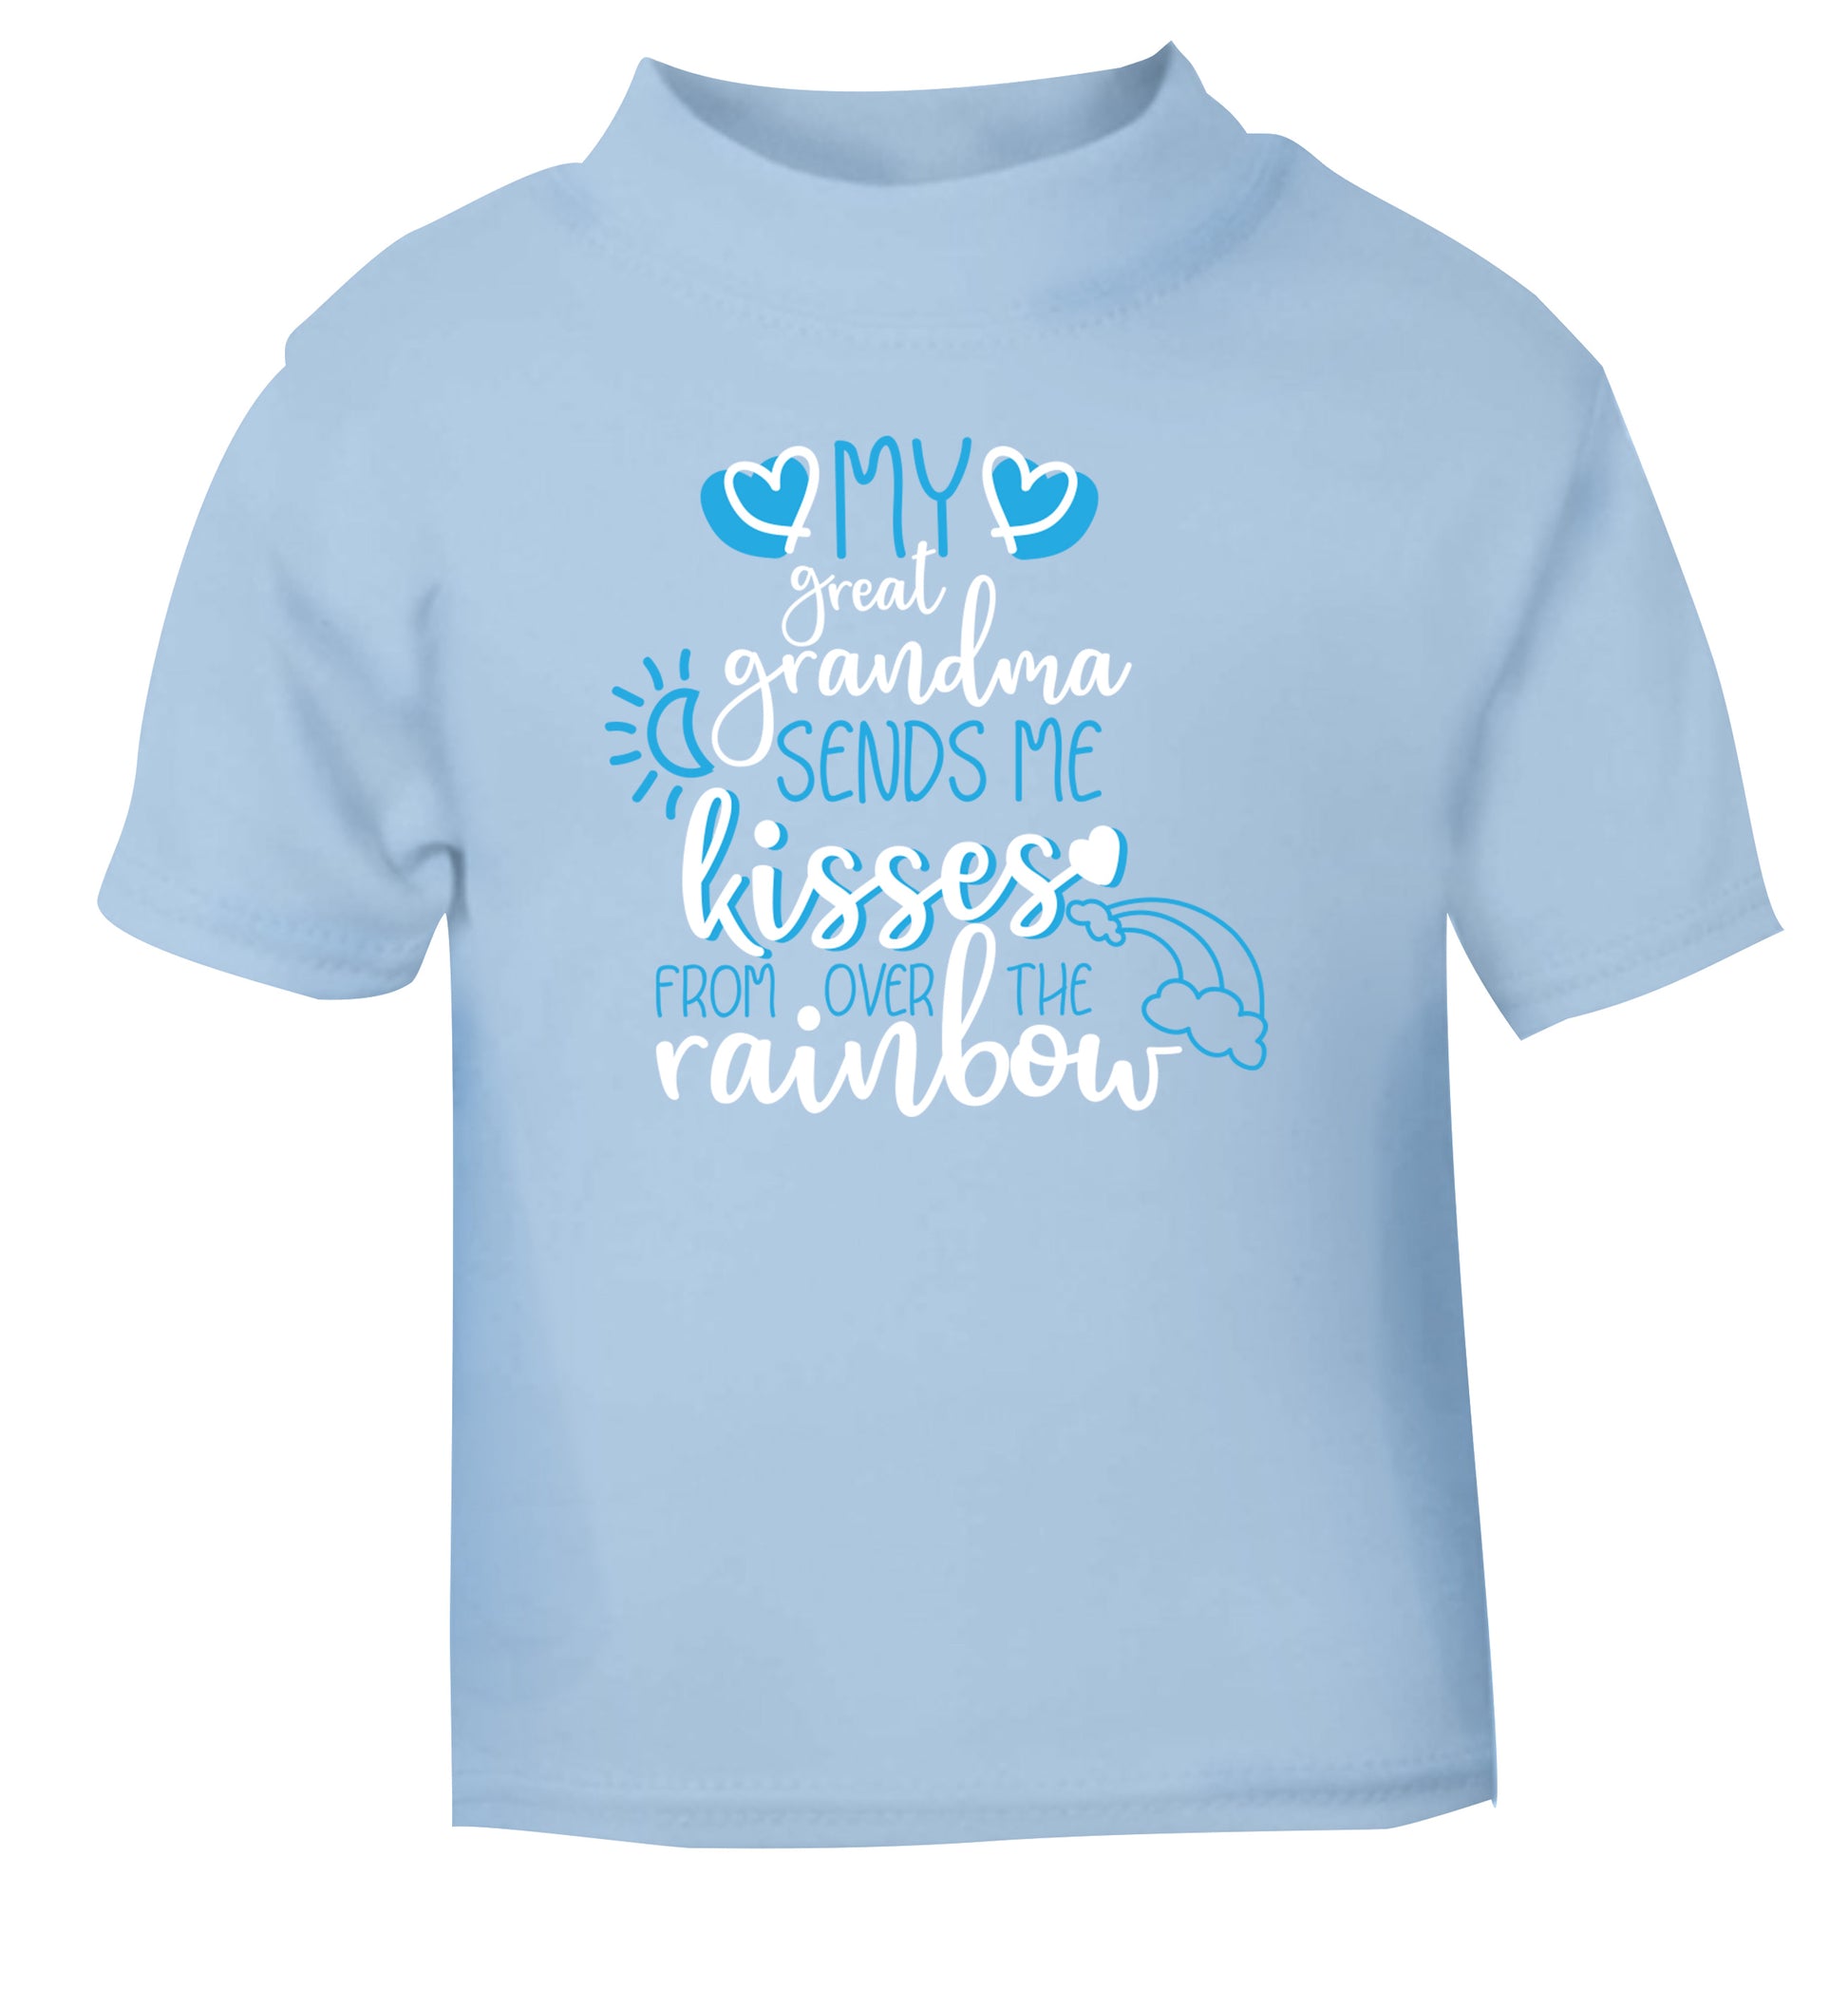 My great grandma sends me kisses from over the rainbow light blue Baby Toddler Tshirt 2 Years